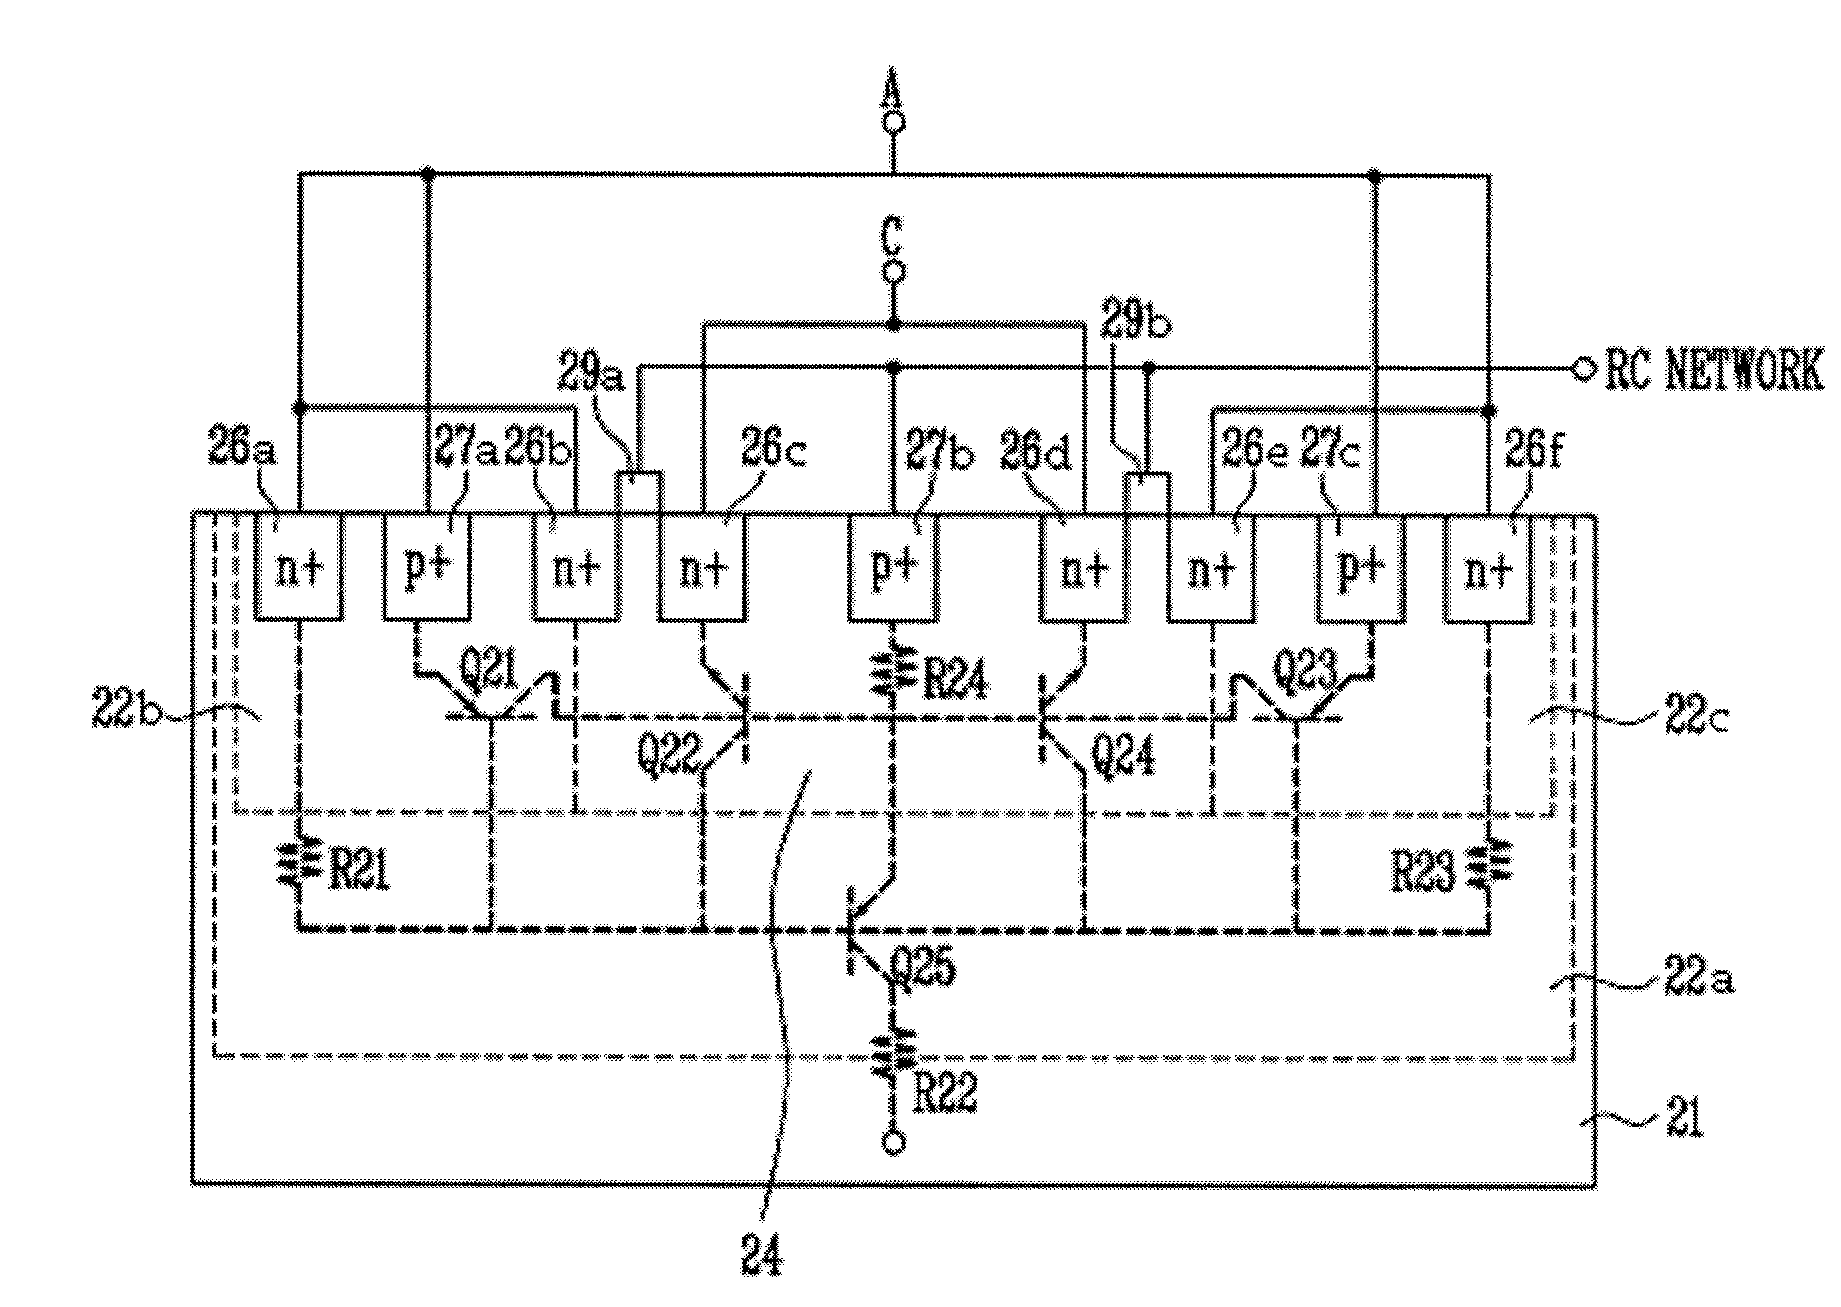 Electrostatic discharge protection circuit using triple welled silicon controlled rectifier